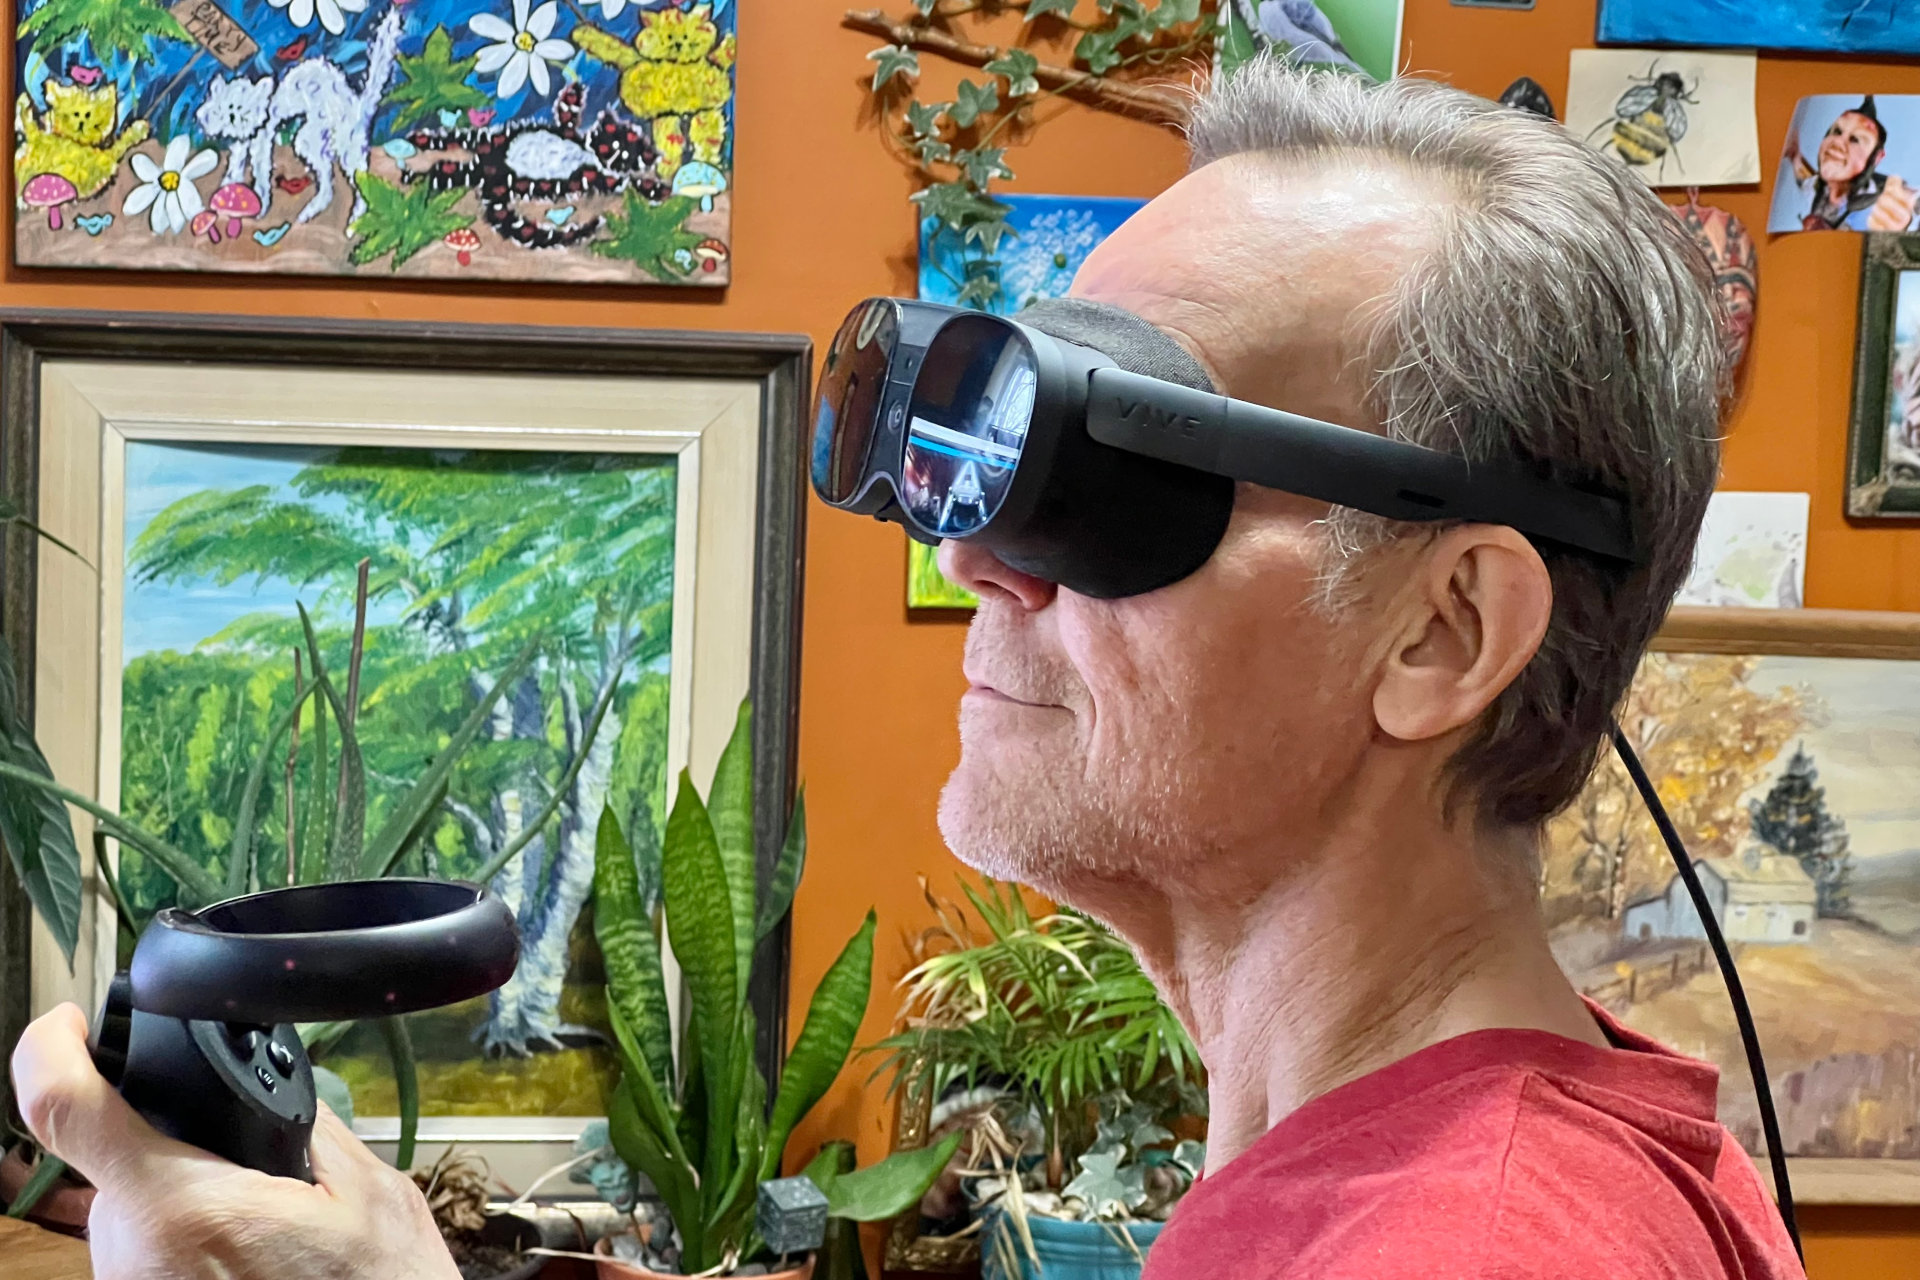 Alan Truly wears the HTC Vive XR Elite in the lightweight glasses mode.